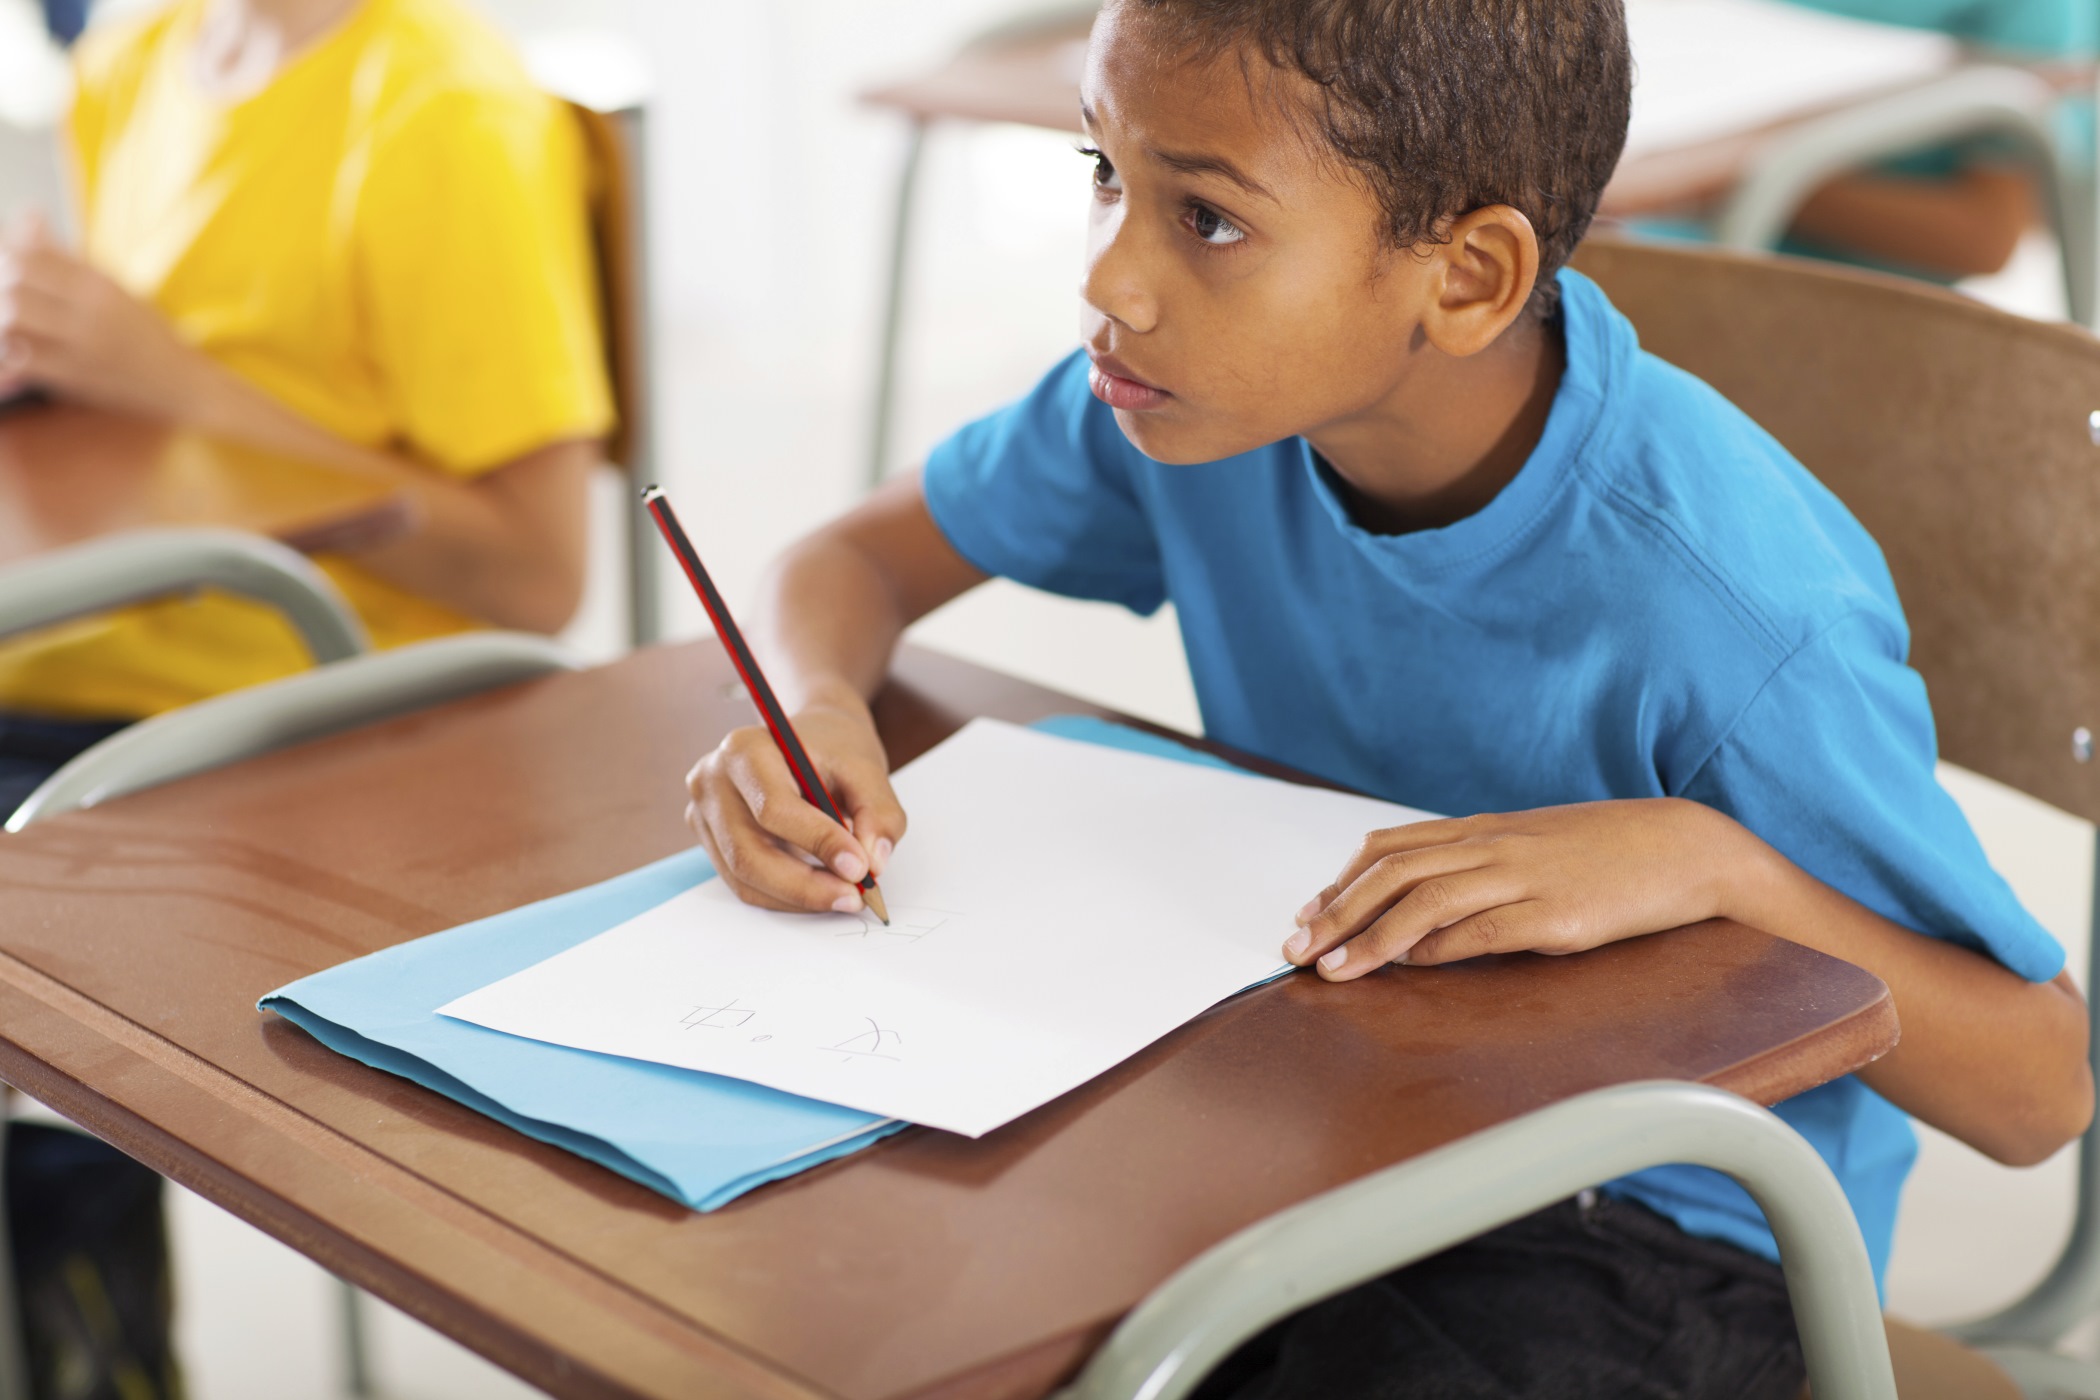 An older boy is sitting at a desk in a classoom writing on a paper with a pencil. He is between 7 and 11 years old